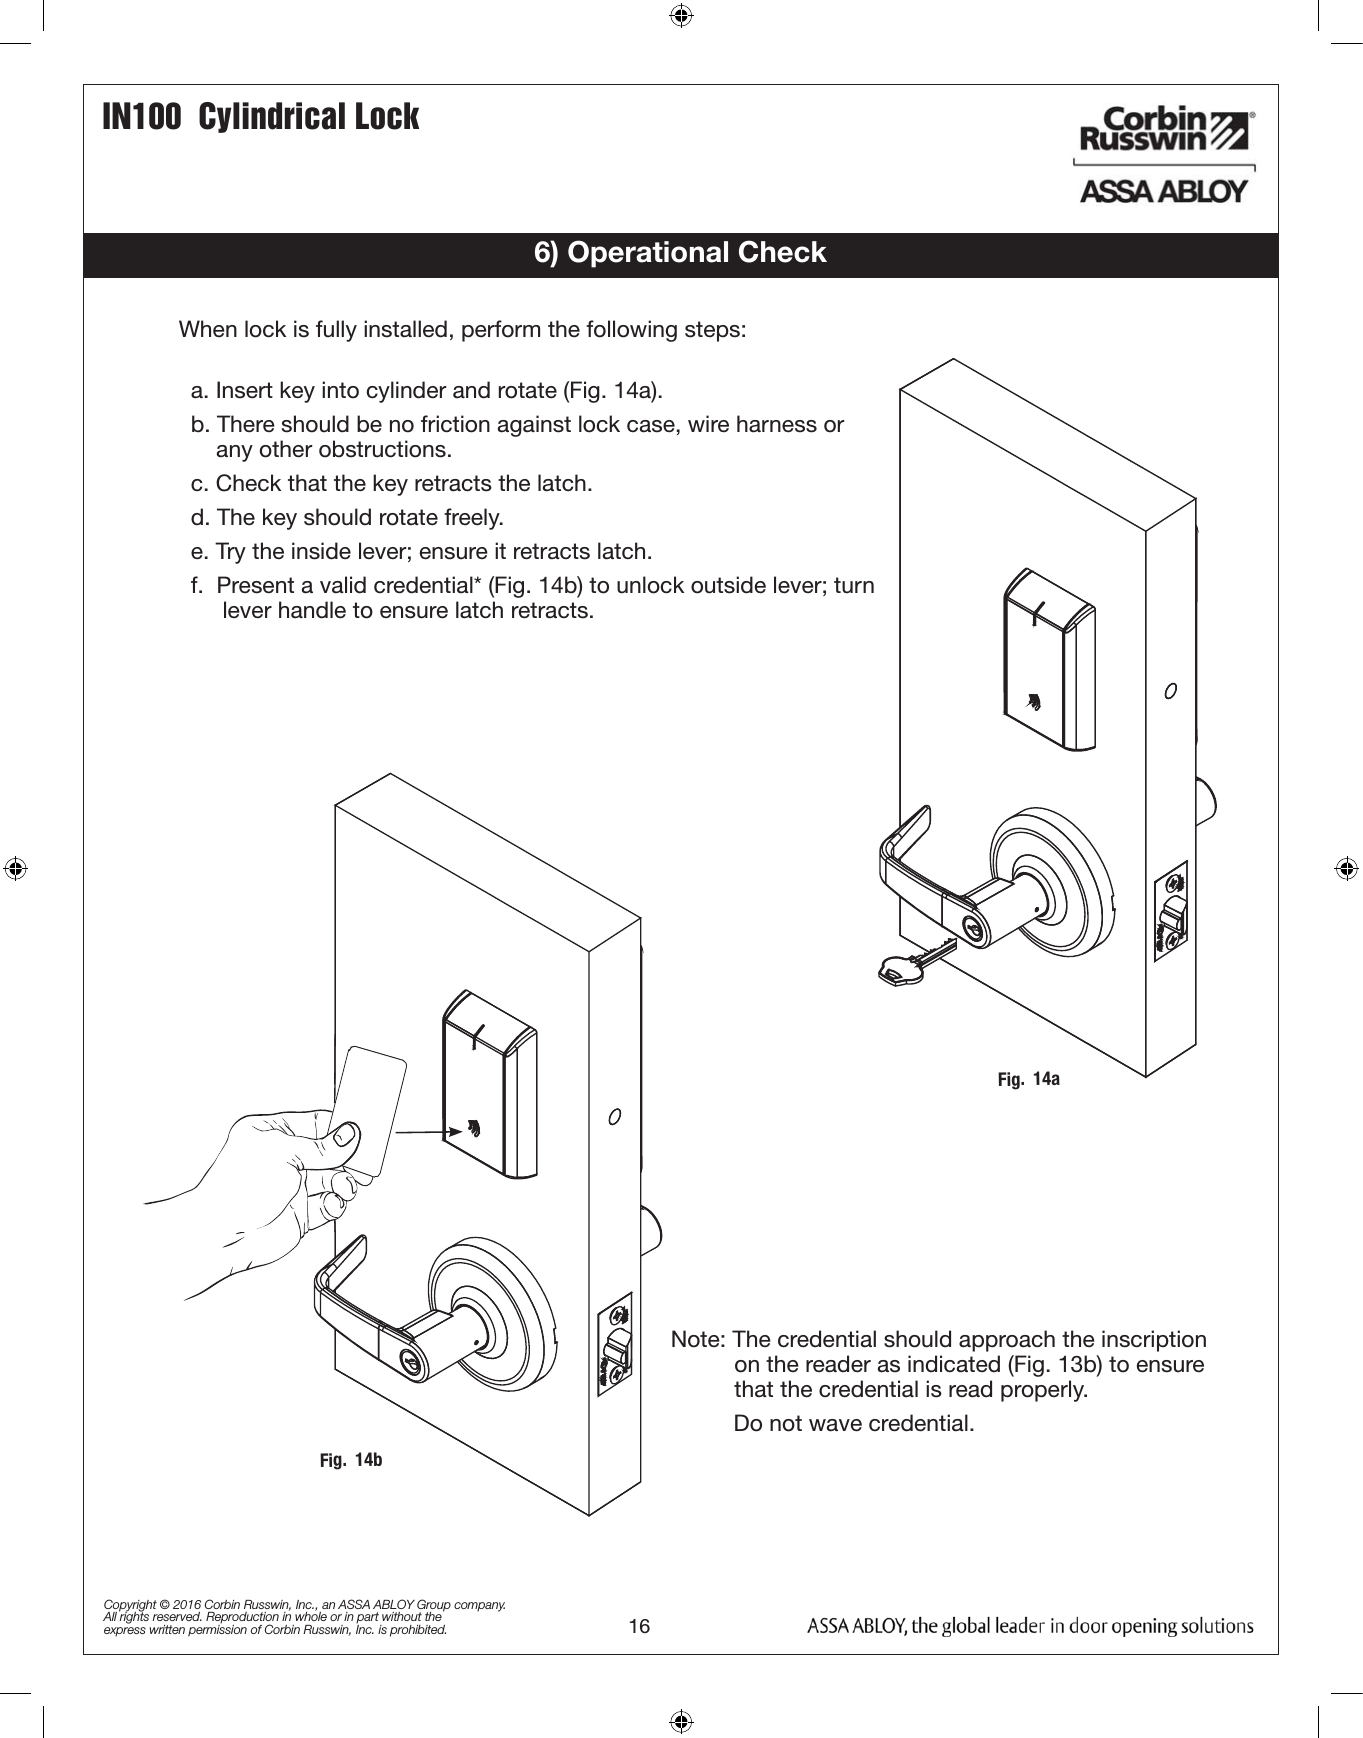 16IN100  Cylindrical LockCopyright © 2016 Corbin Russwin, Inc., an ASSA ABLOY Group company. All rights reserved. Reproduction in whole or in part without the express written permission of Corbin Russwin, Inc. is prohibited.6) Operational Checka. Insert key into cylinder and rotate (Fig. 14a). b. There should be no friction against lock case, wire harness or          any other obstructions.c. Check that the key retracts the latch.d. The key should rotate freely.e. Try the inside lever; ensure it retracts latch.f.  Present a valid credential* (Fig. 14b) to unlock outside lever; turn       lever handle to ensure latch retracts.Fig.  14aFig.  14bWhen lock is fully installed, perform the following steps:Note: The credential should approach the inscription             on the reader as indicated (Fig. 13b) to ensure                         that the credential is read properly.       Do not wave credential. 